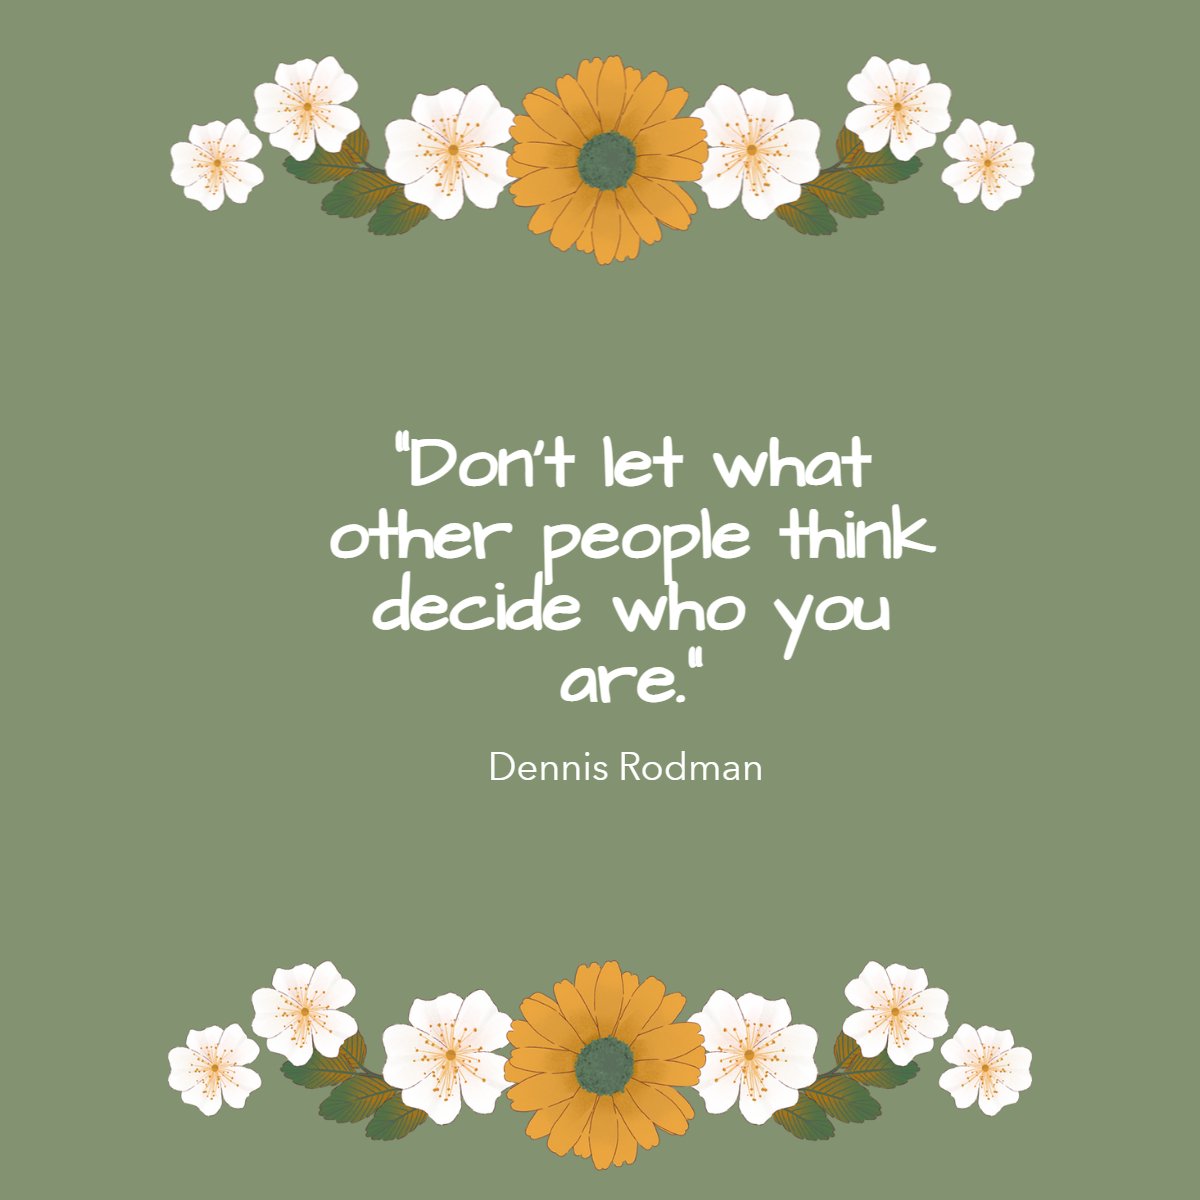 “Don't let what other people think decide who you are.”
— Dennis Rodman

#Motivation #DennisRodman #quoteoftheday✏️ #quotestagram
 #RealestateAppleton #Appletonwisconsin #AppletonWisconsinRealEstate #CharlesRobbinsRealtor